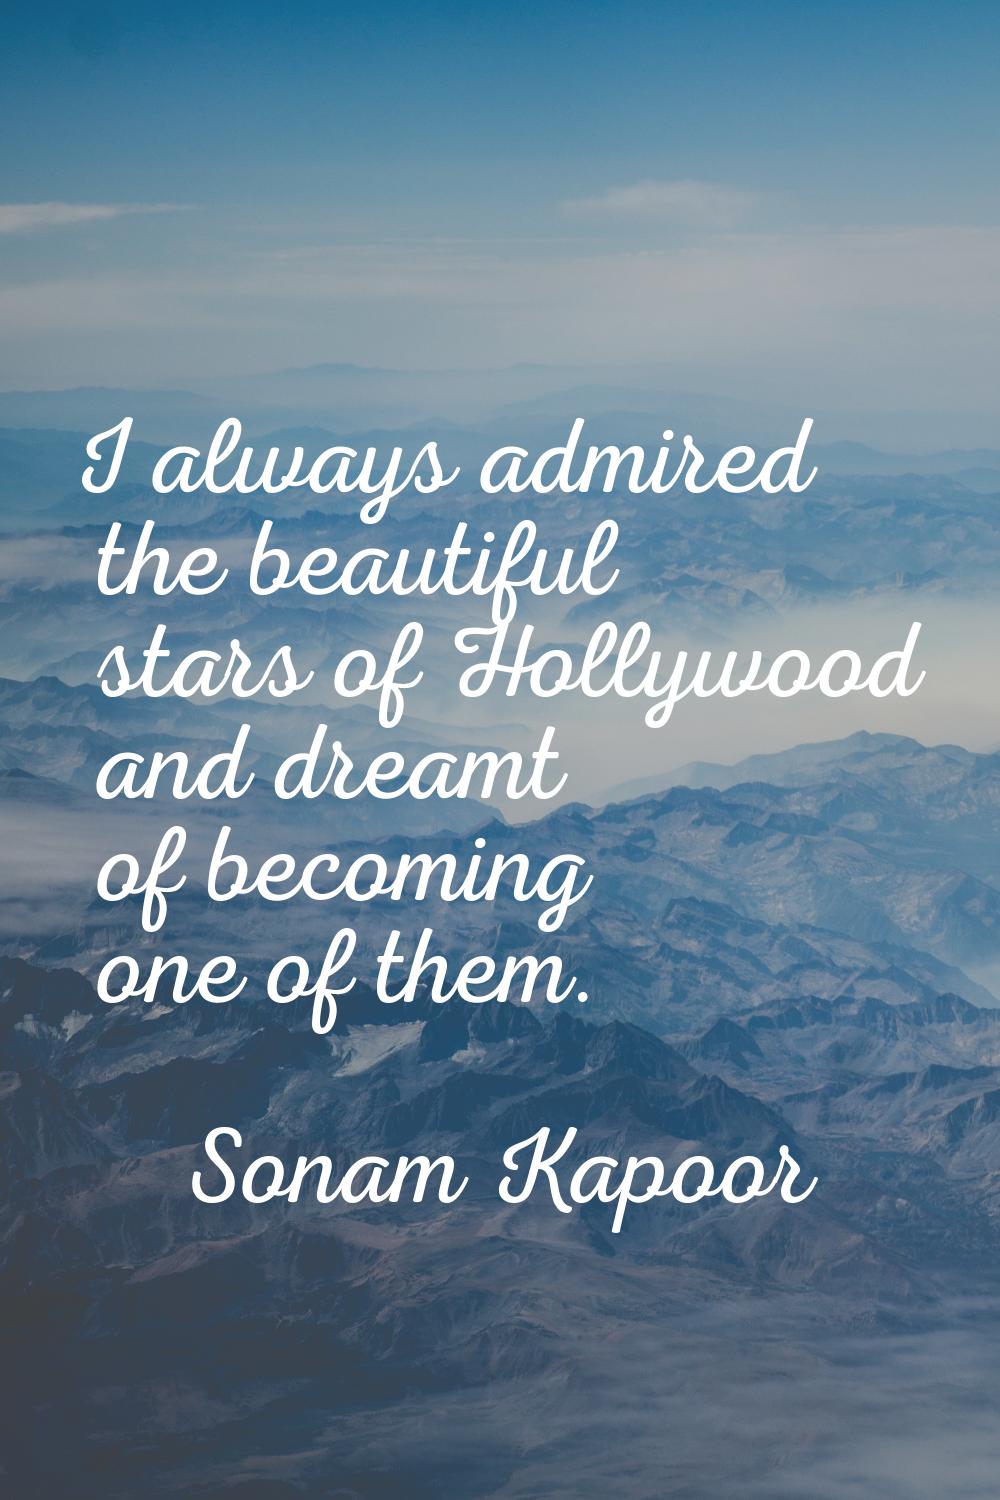 I always admired the beautiful stars of Hollywood and dreamt of becoming one of them.